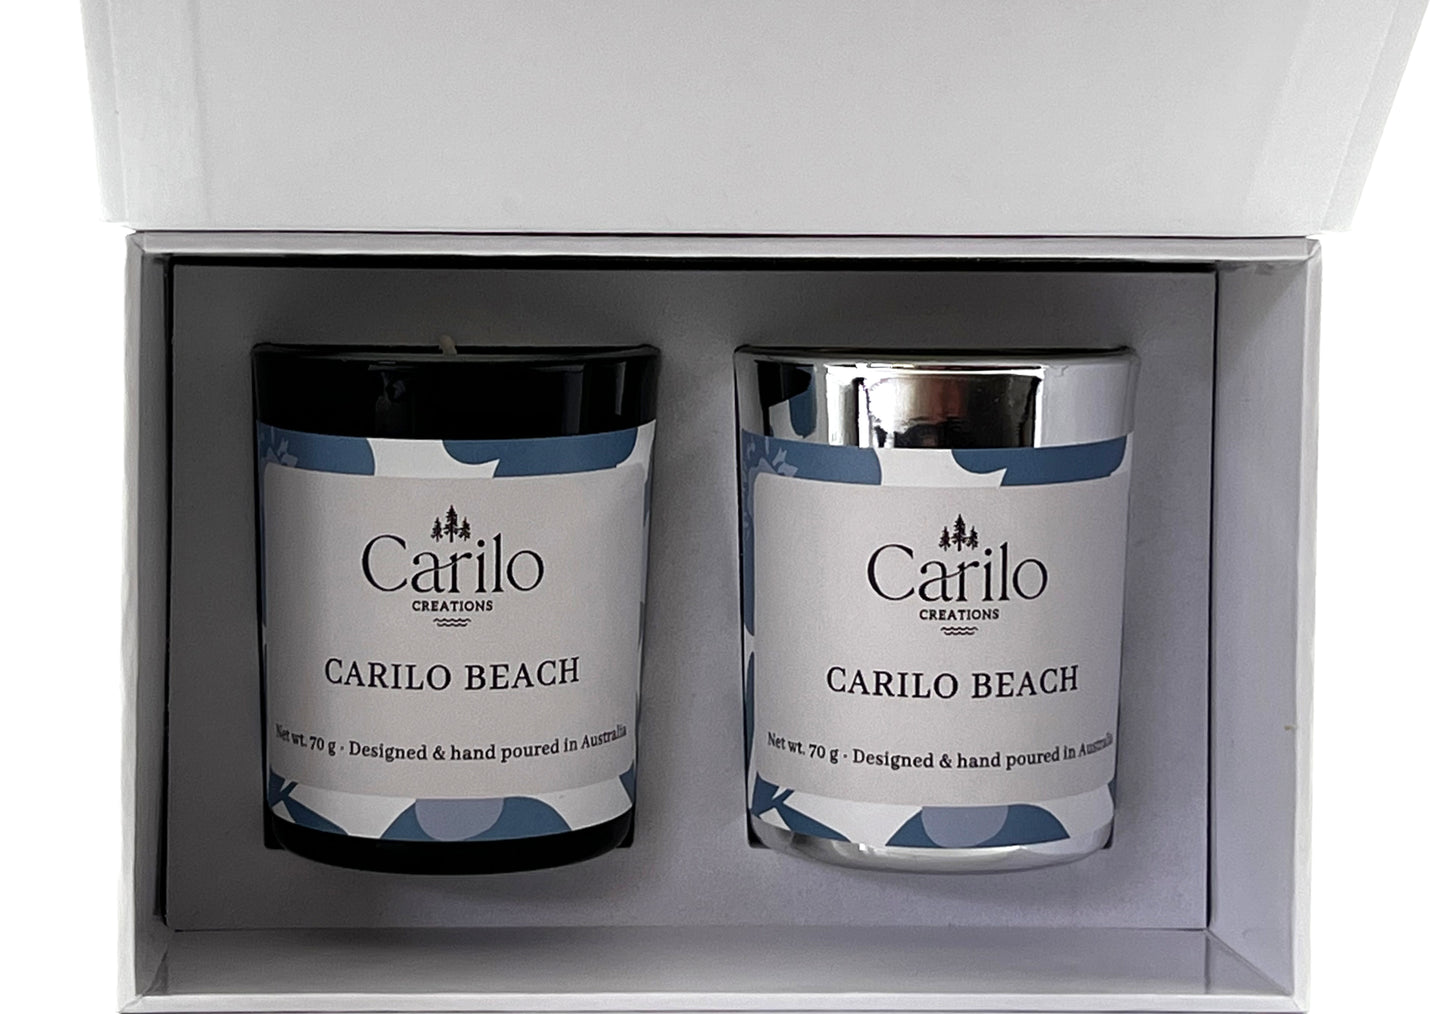 CARILO BEACH - DELUXE DUO SCENTED CANDLES - 70g each